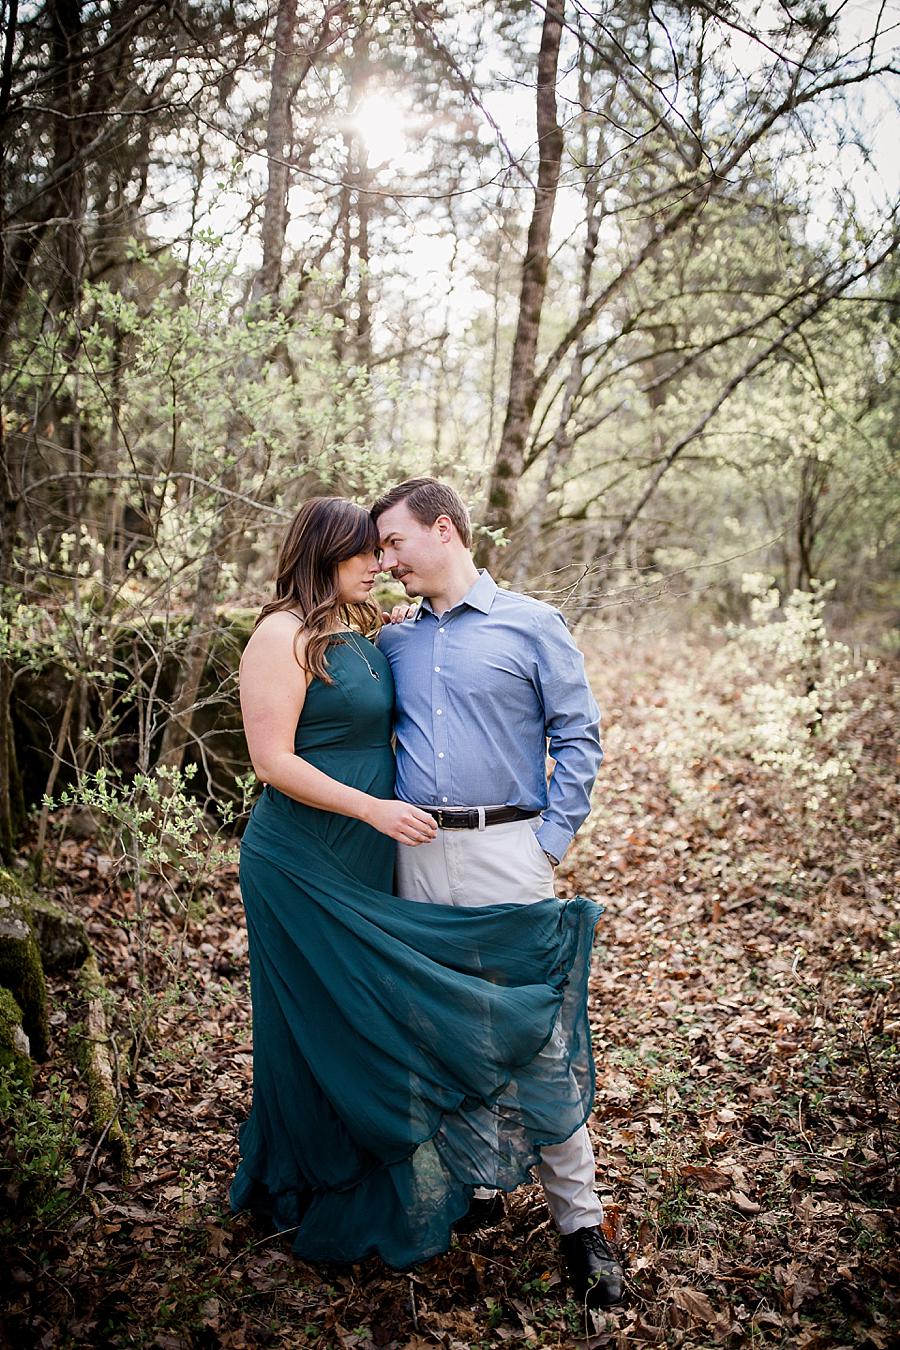 Dress blowing into him at this Knoxville engagement session at The Quarry by Knoxville Wedding Photographer, Amanda May Photos.